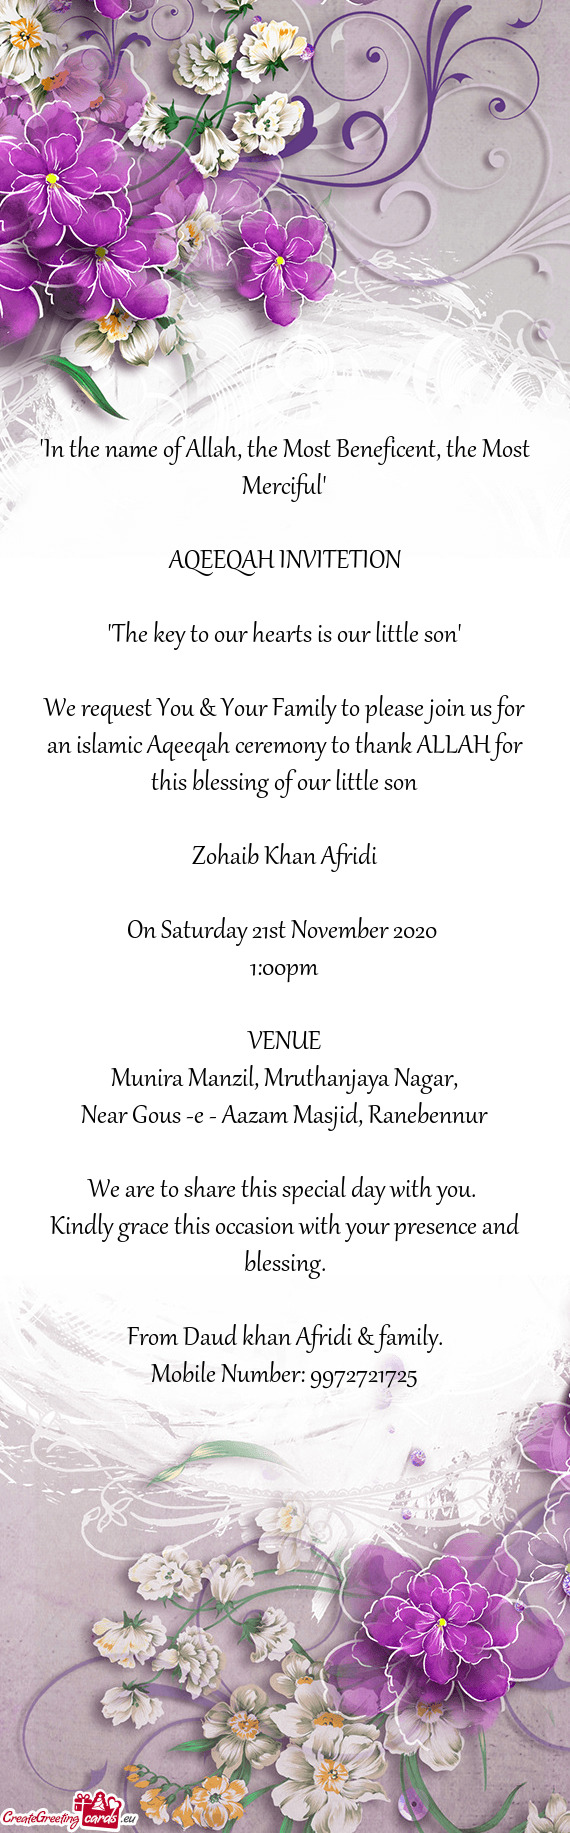 We request You & Your Family to please join us for an islamic Aqeeqah ceremony to thank ALLAH for th